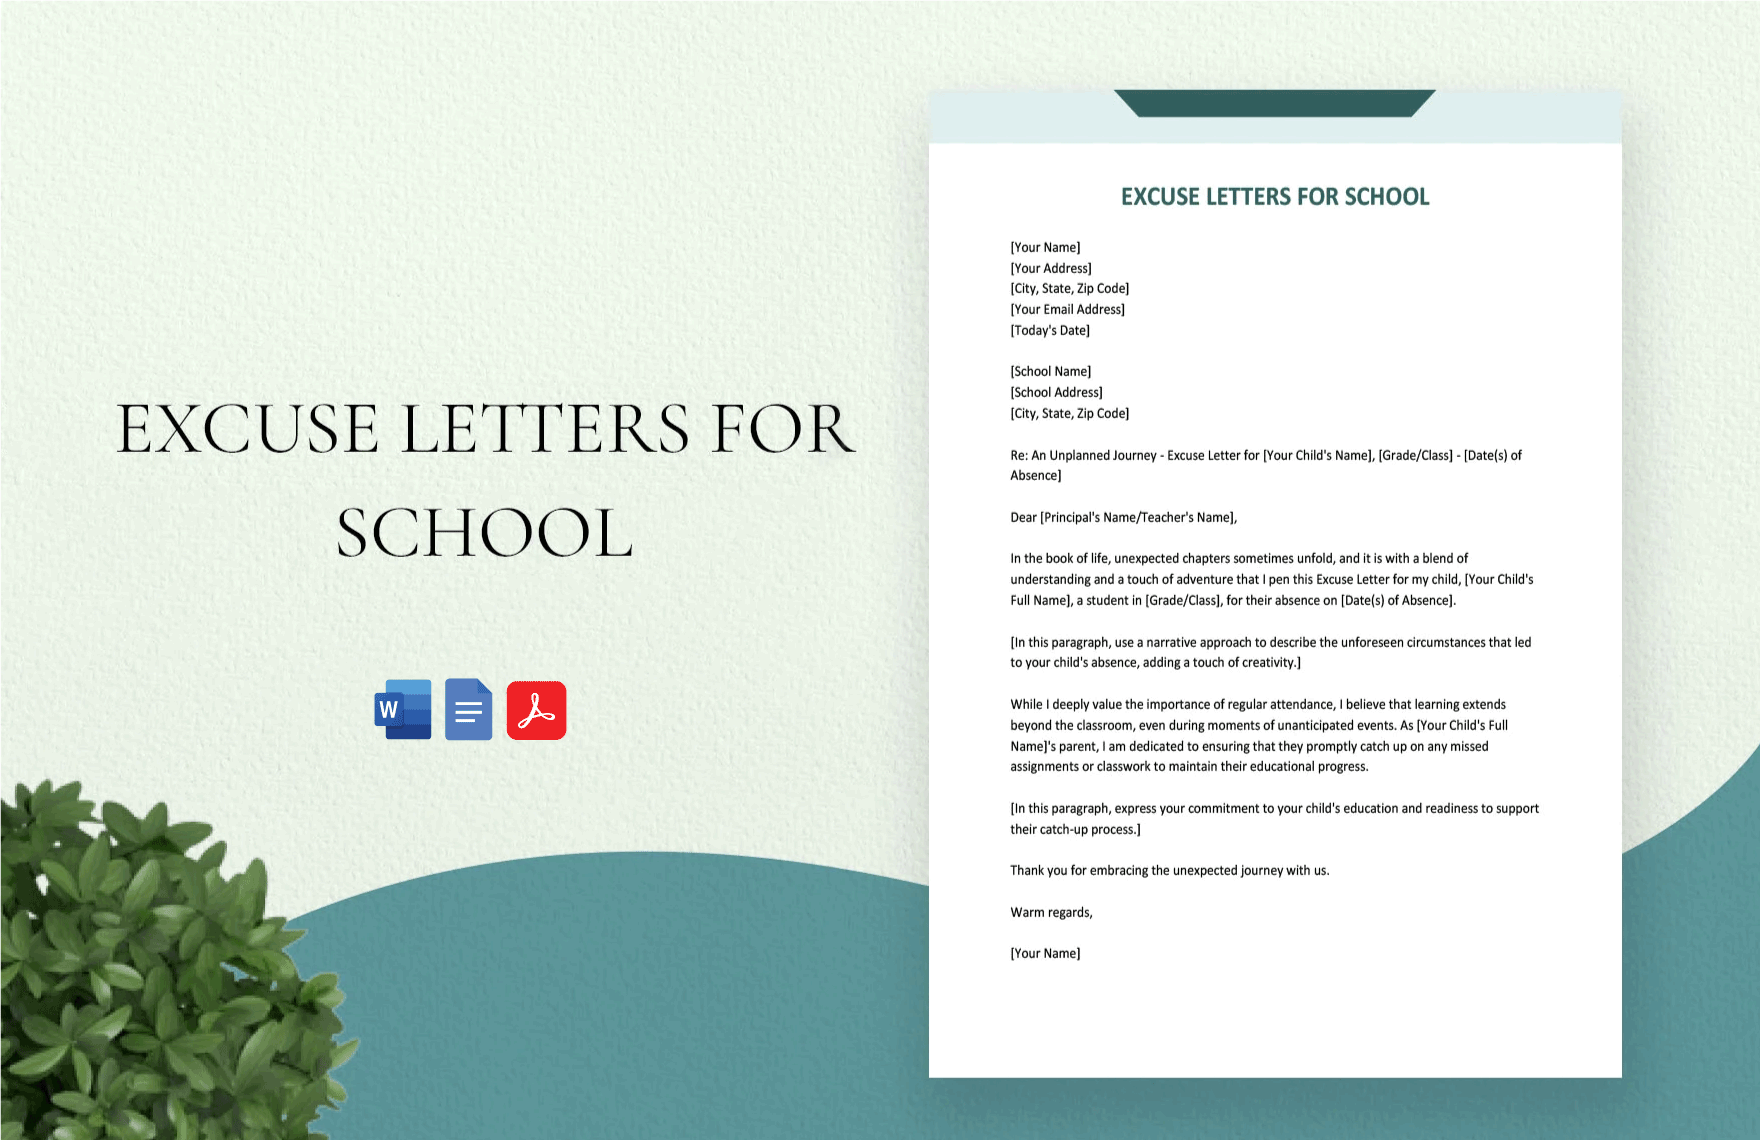 Excuse Letters for School